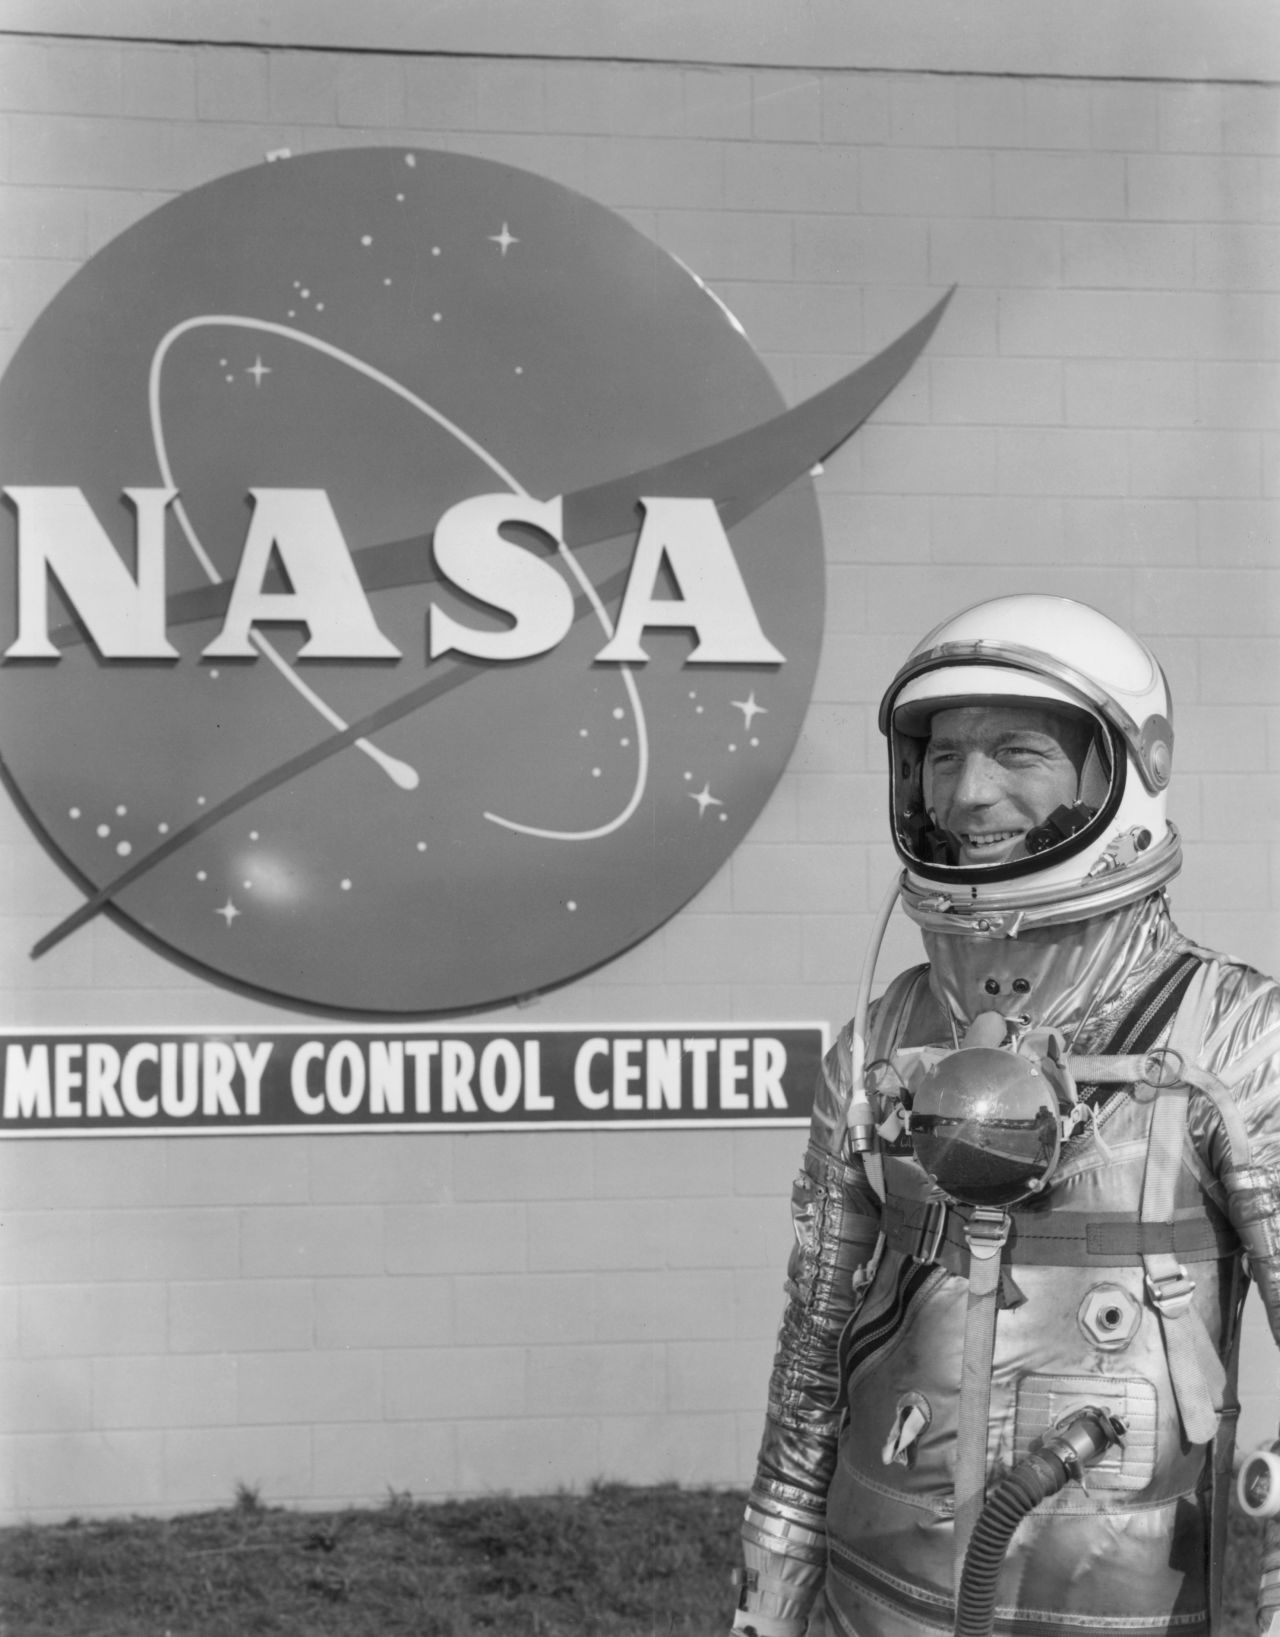 Carpenter in front of the NASA Mercury Control Center in Cape Canaveral in May 1962.